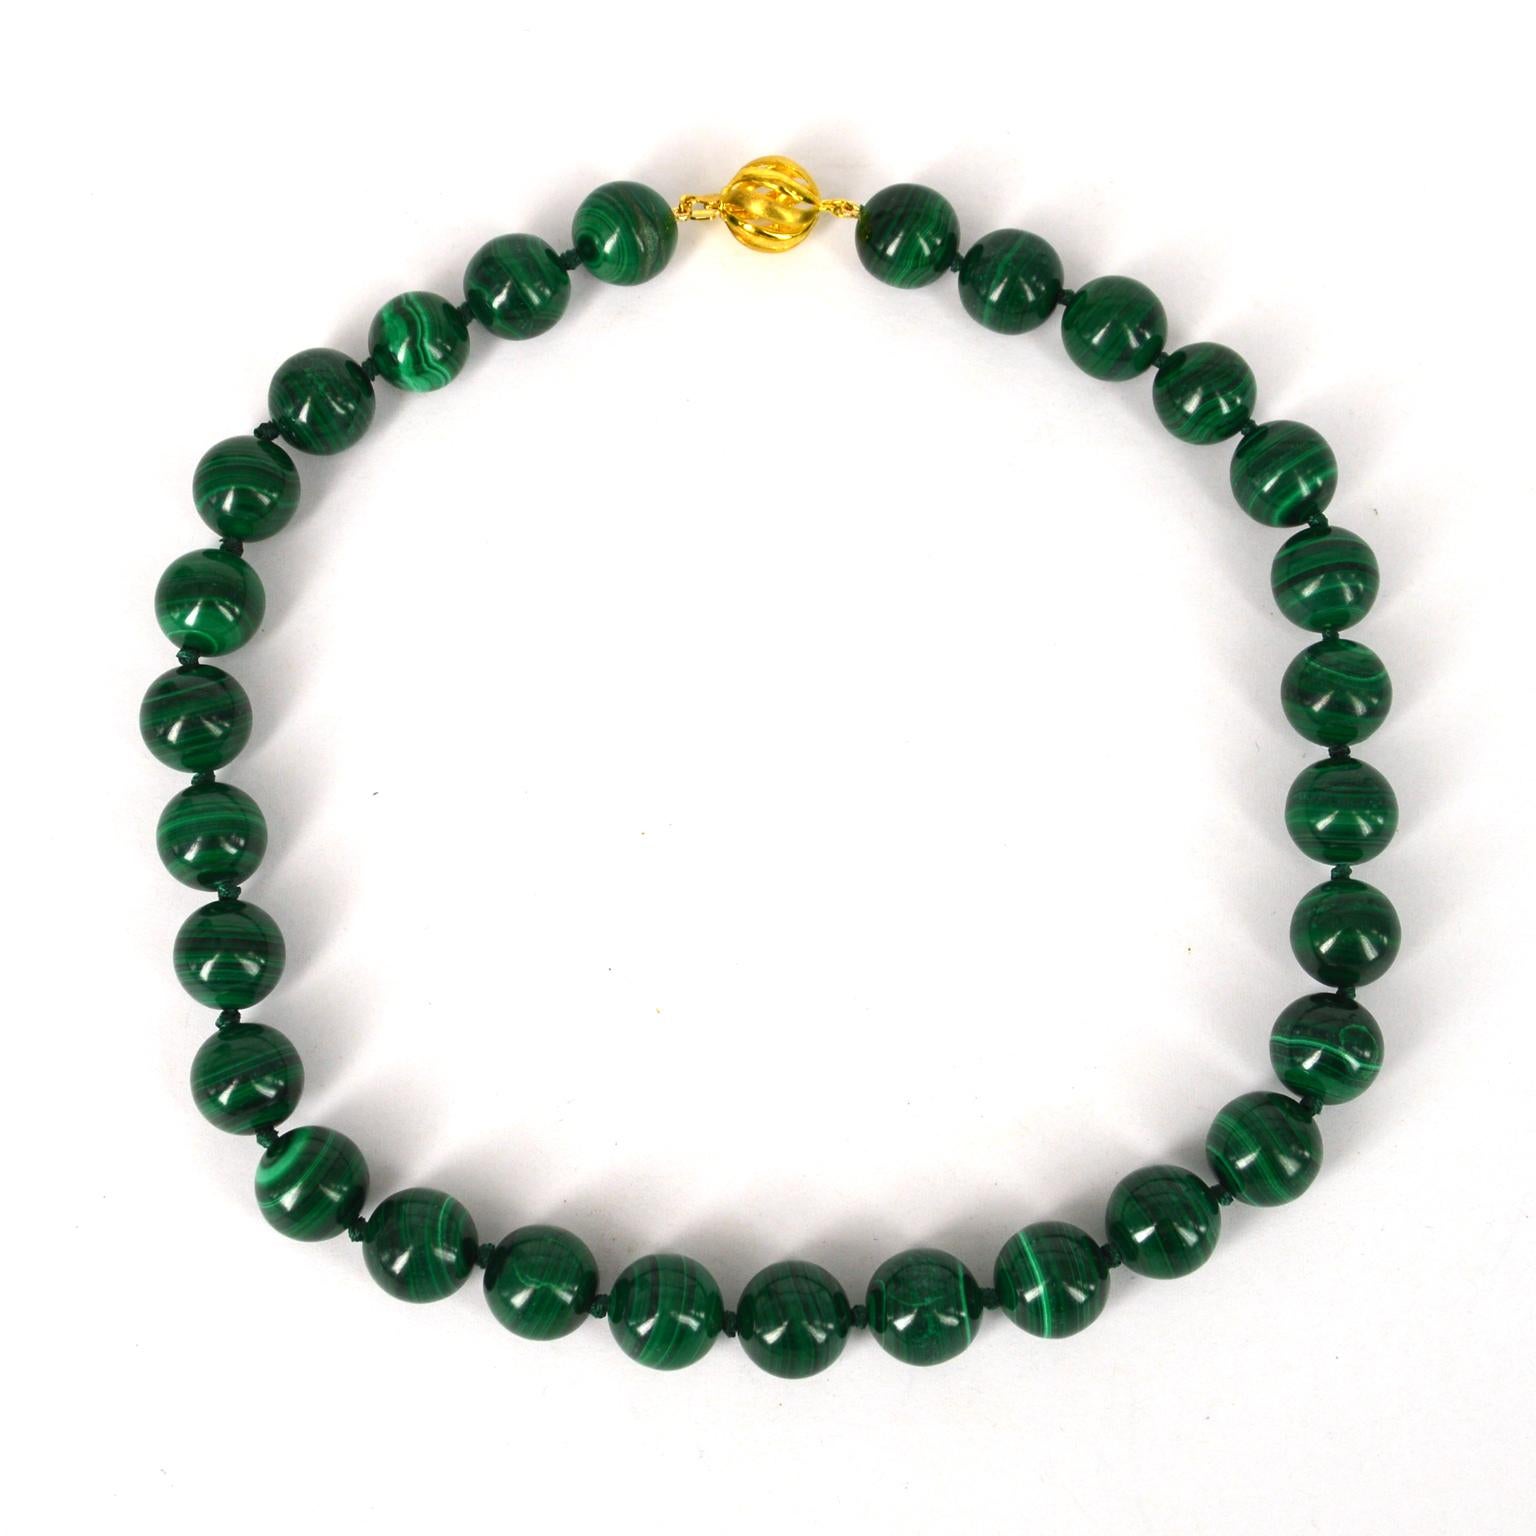 High Quality Natural 14mm Malachite beads hand knotted on matching thread with Gold Plate Sterling Silver 12mm clasp.
Total length of Necklace 47cm.

